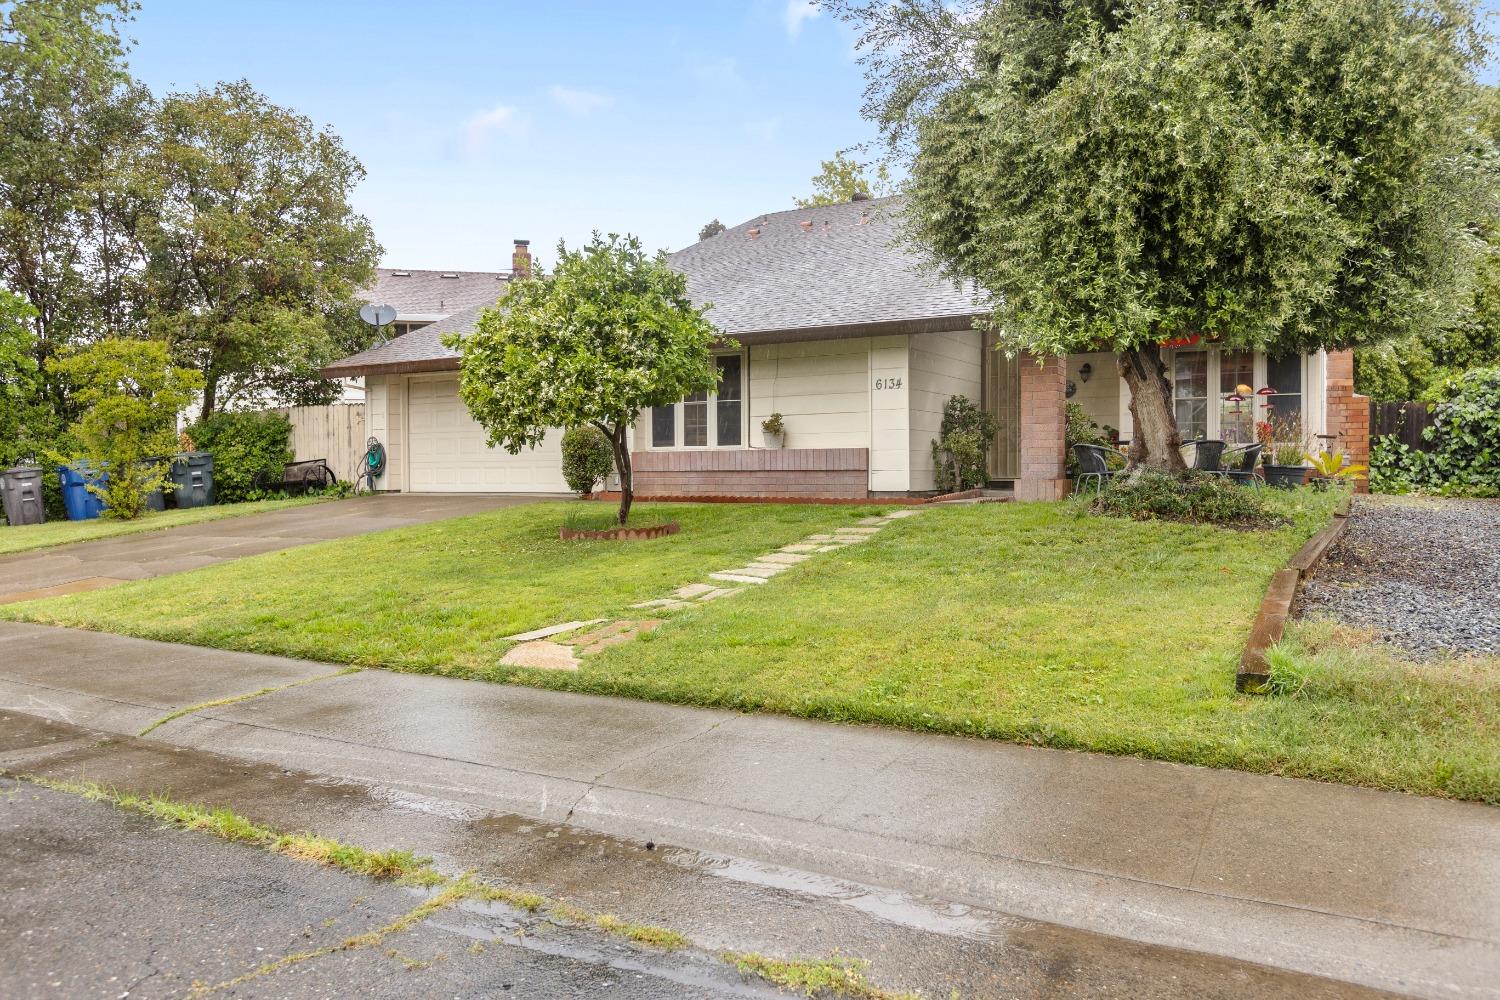 Photo of 6134 Tremain Dr in Citrus Heights, CA